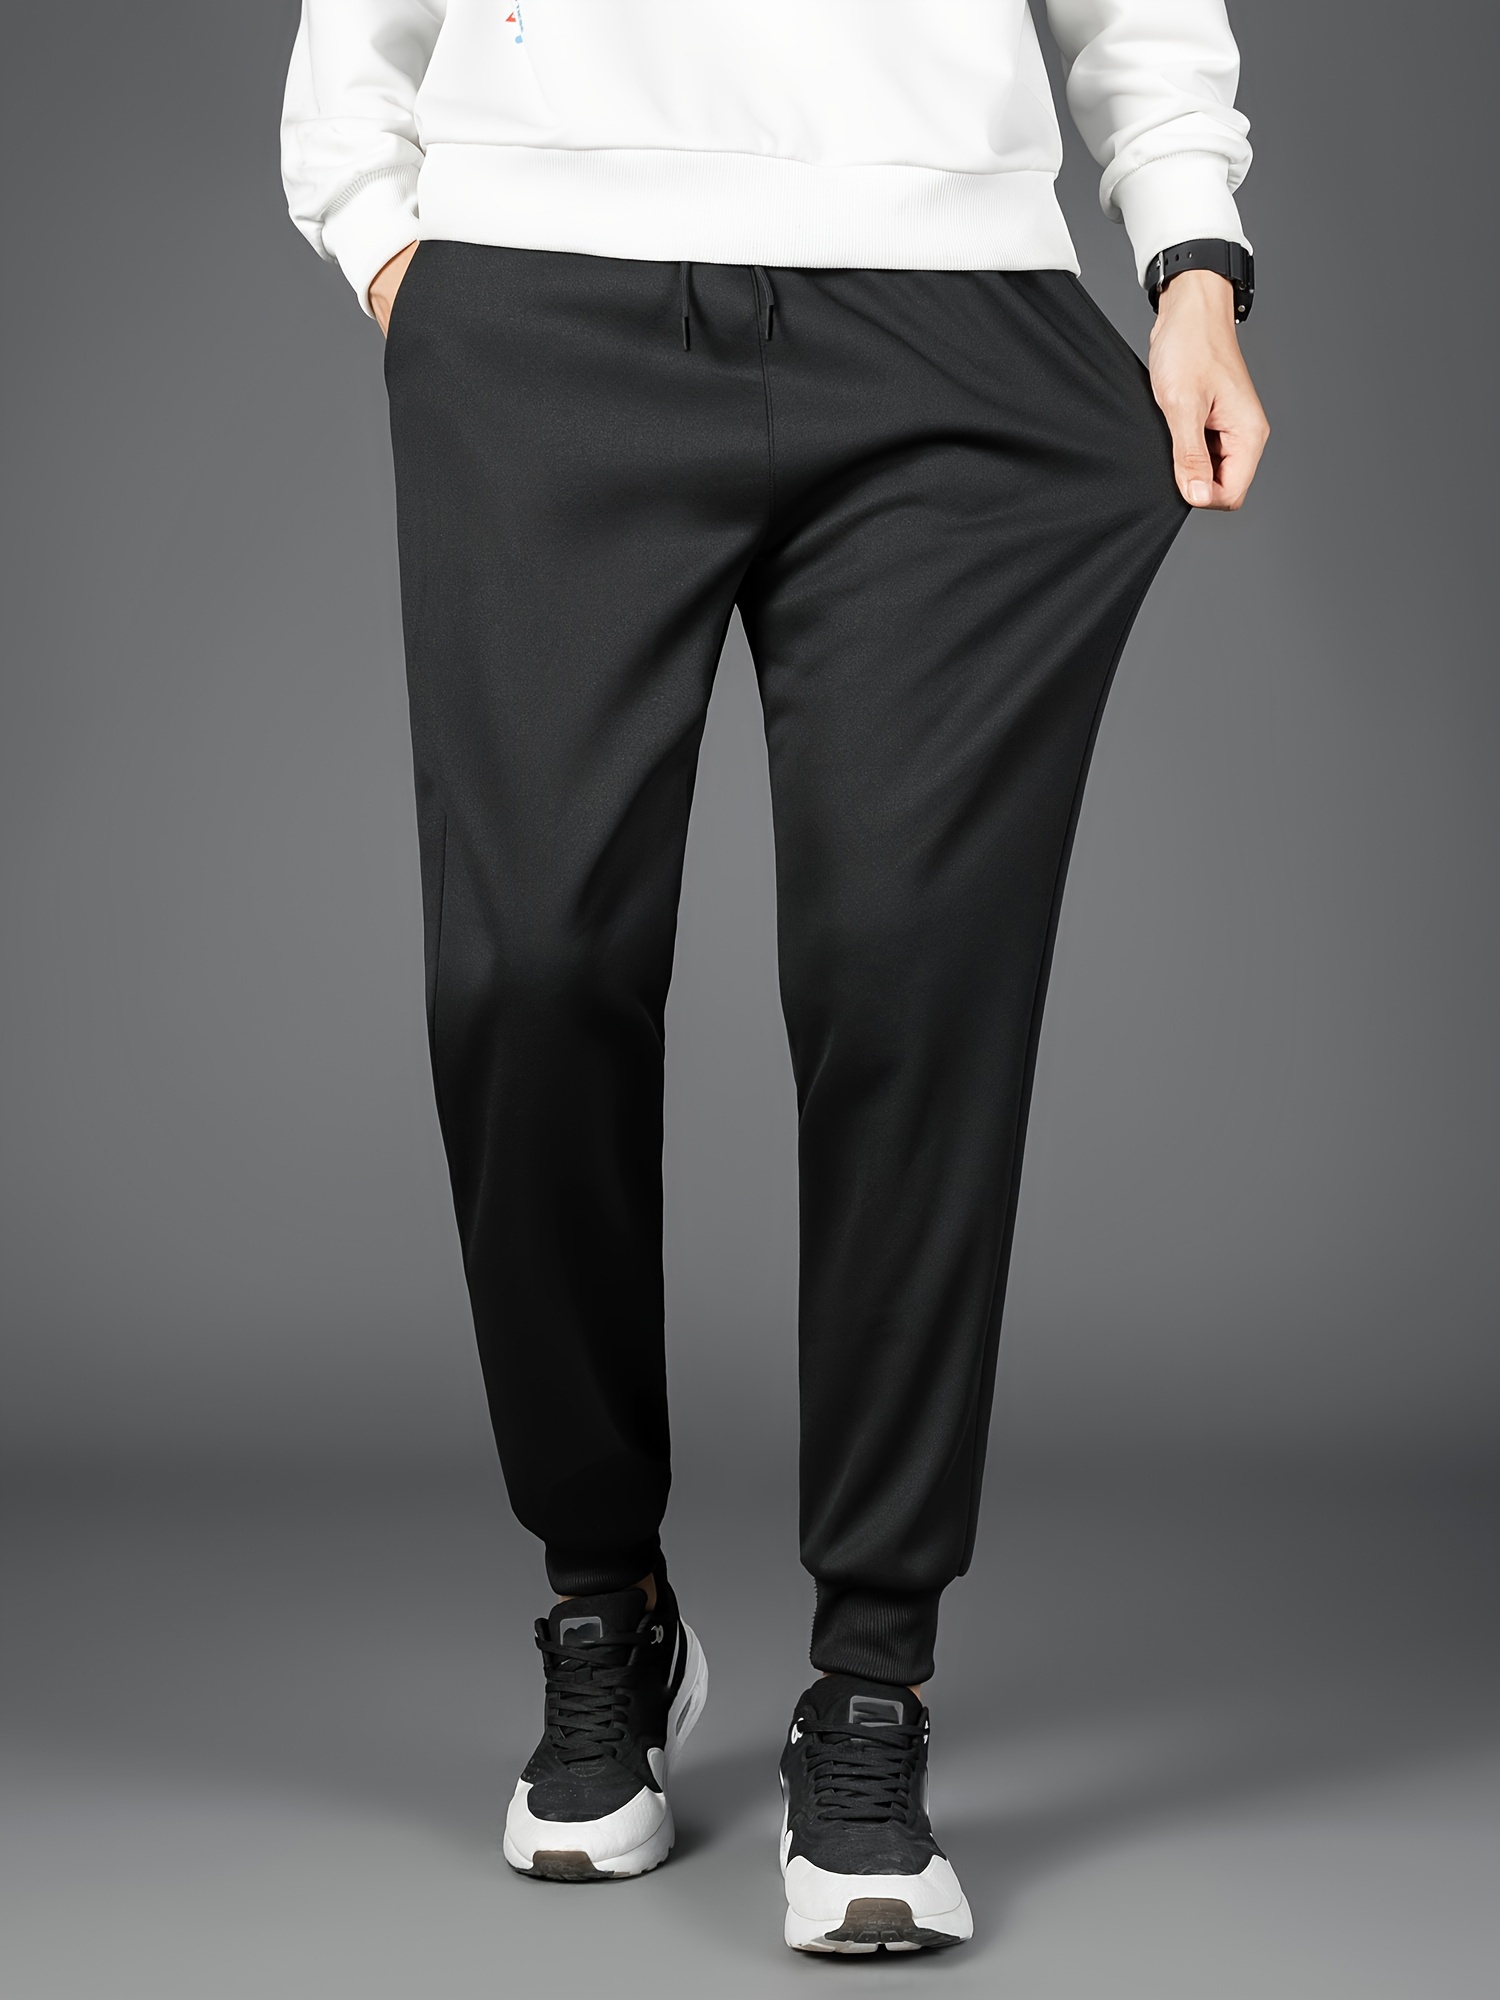 Women's Fleece Lined Pants With Pockets Straight Leg Trousers